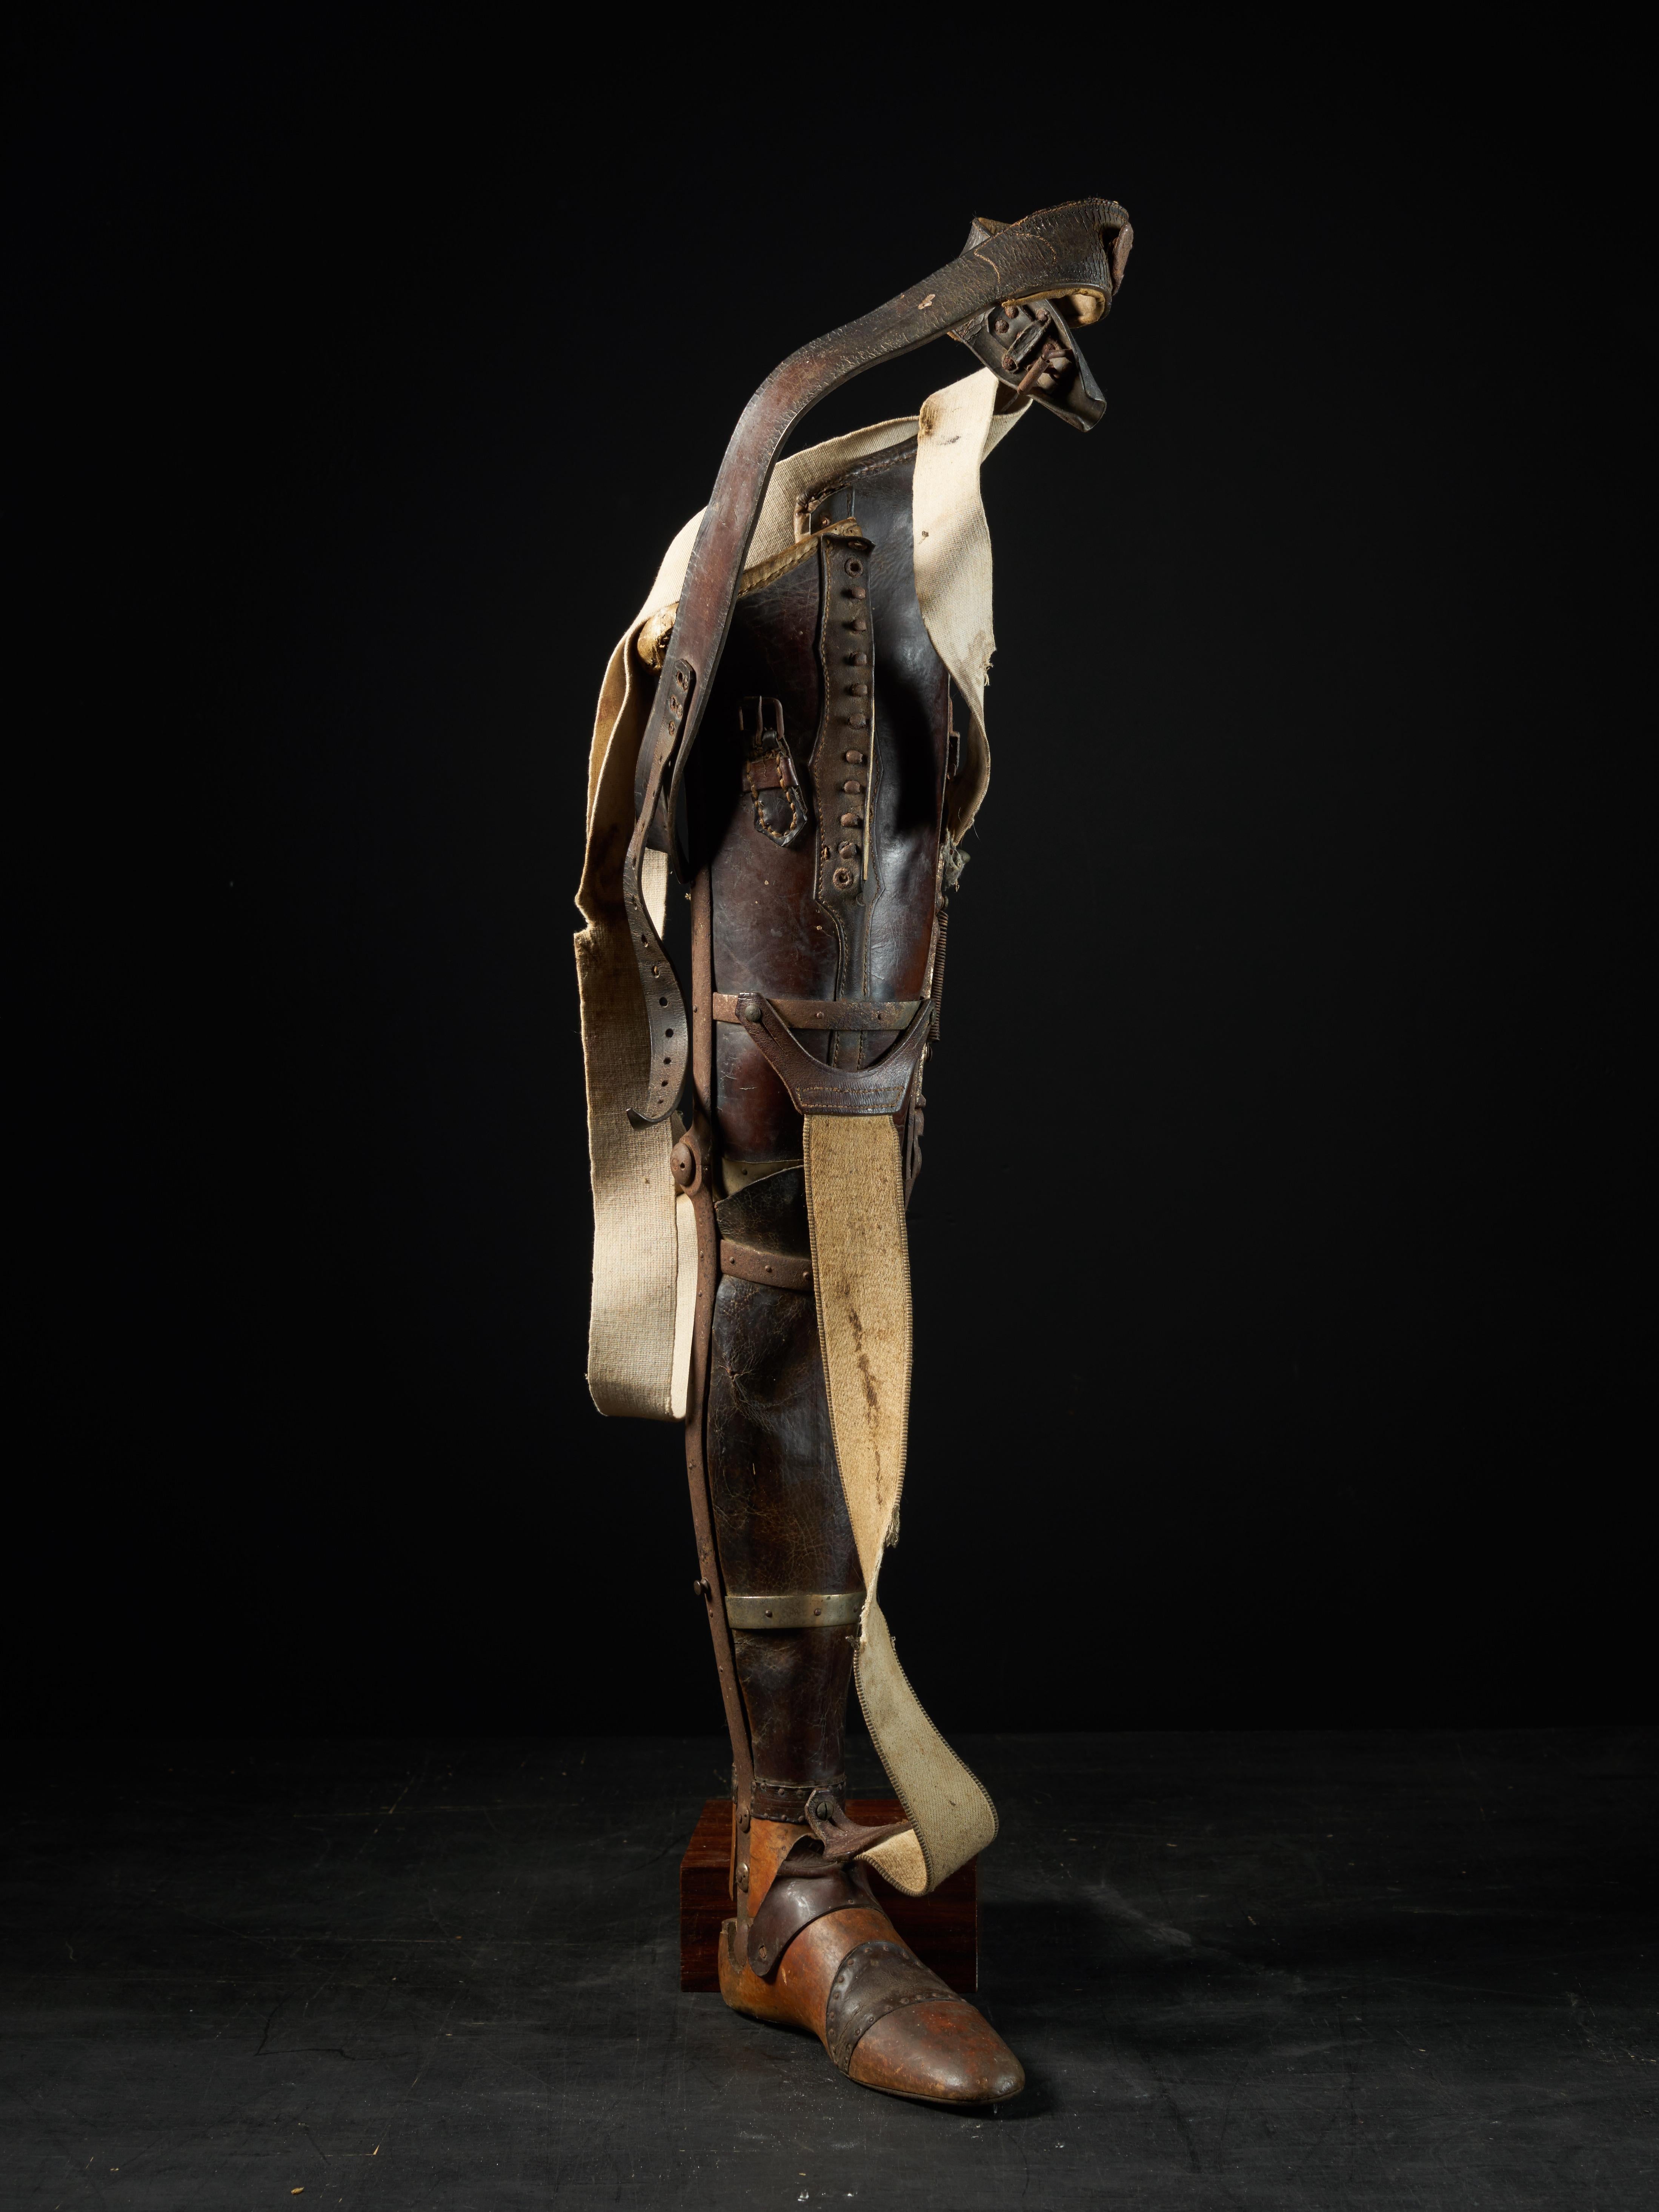 This prosthetic leg was manufactured in Italy in 1917 and is made of wood and leather, circa 1900, the pioneers of prosthetic design had begun the idea of specialized artificial limbs. For the first time, artificial limbs were being mass-produced in